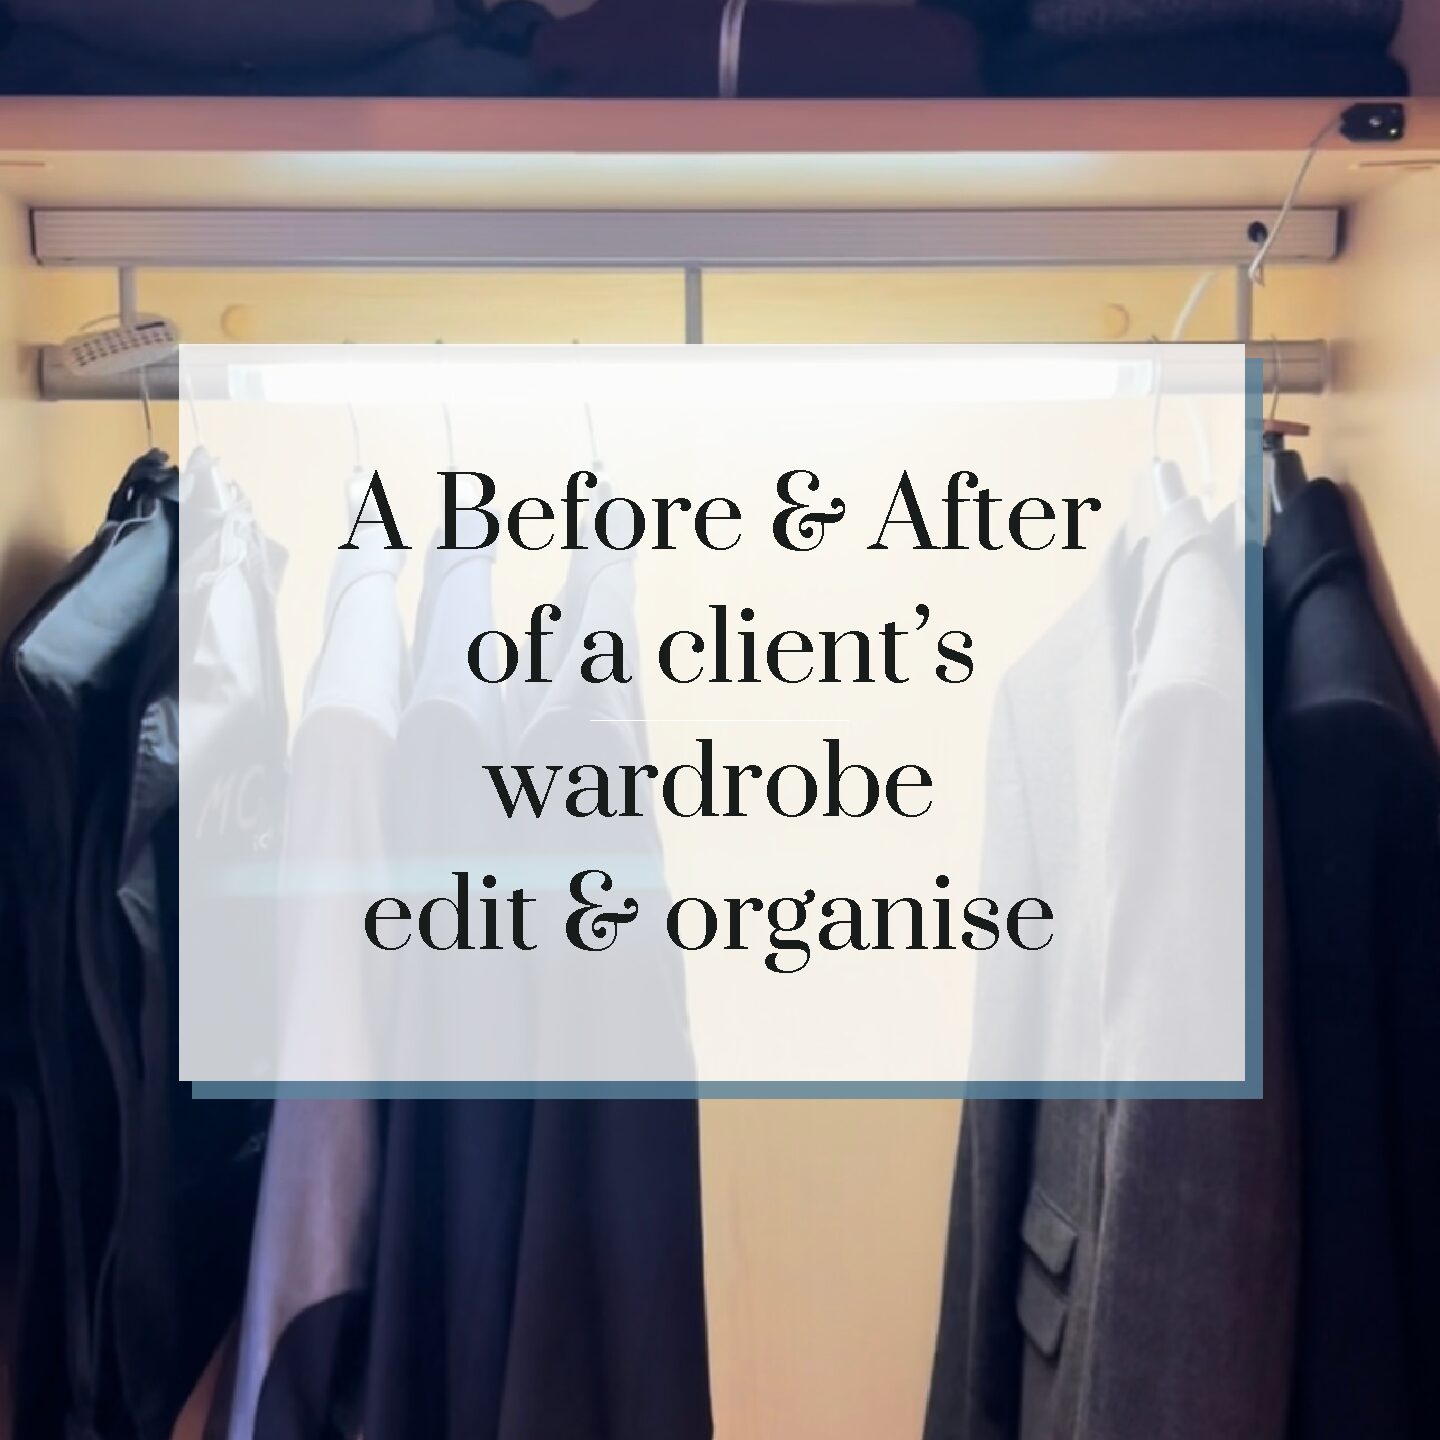 A Before & After of a client’s wardrobe edit & organise